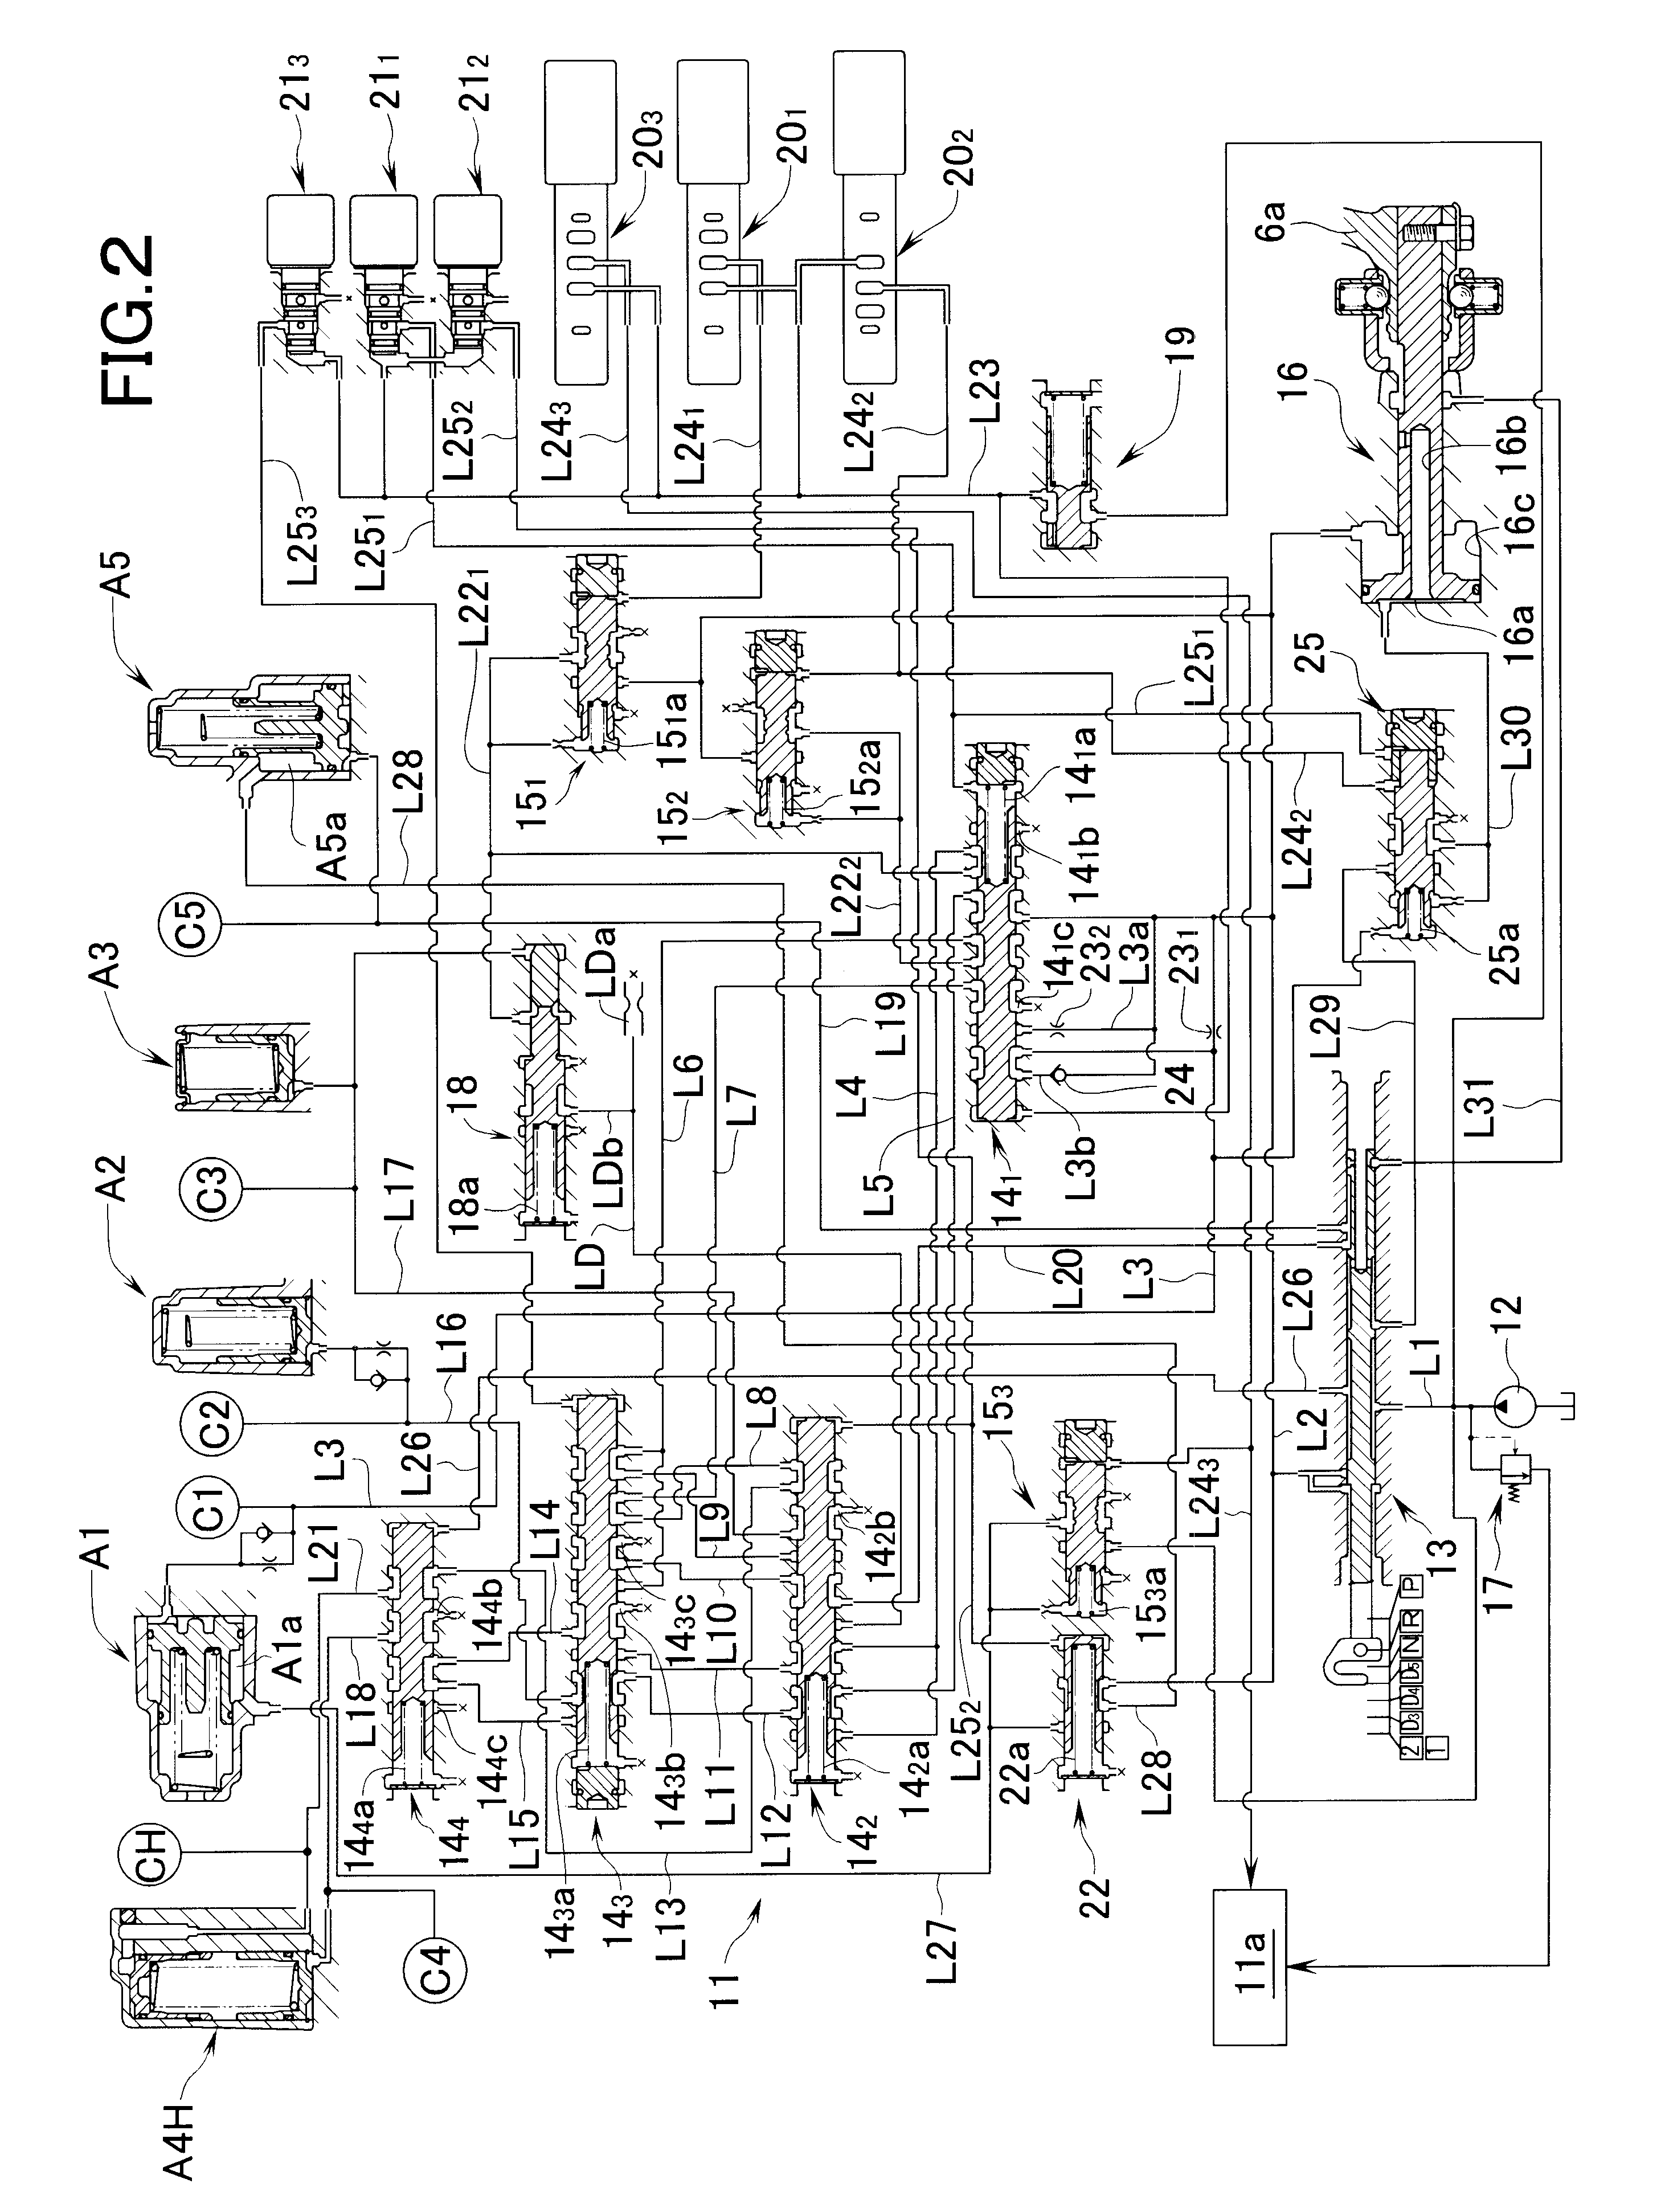 Control apparatus for hydraulically-operated vehicular transmission